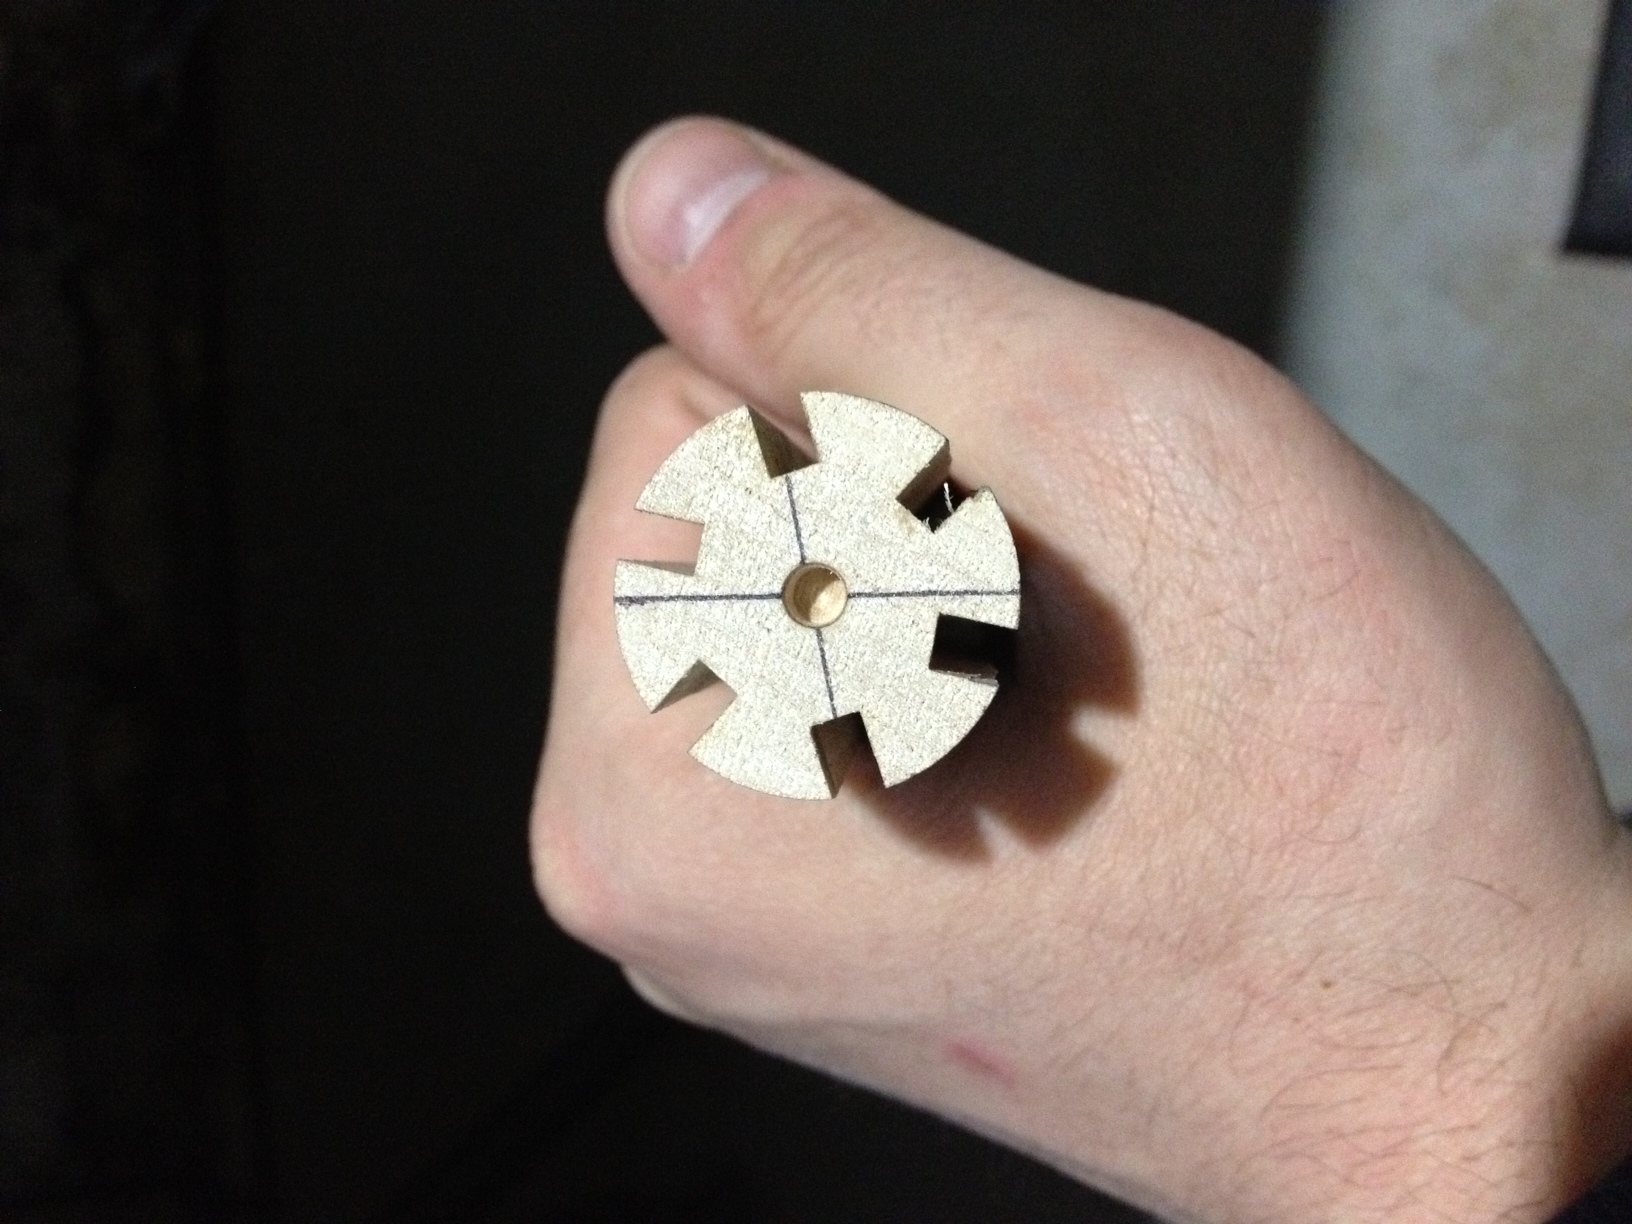 First piece made from router / midi lathe setup.